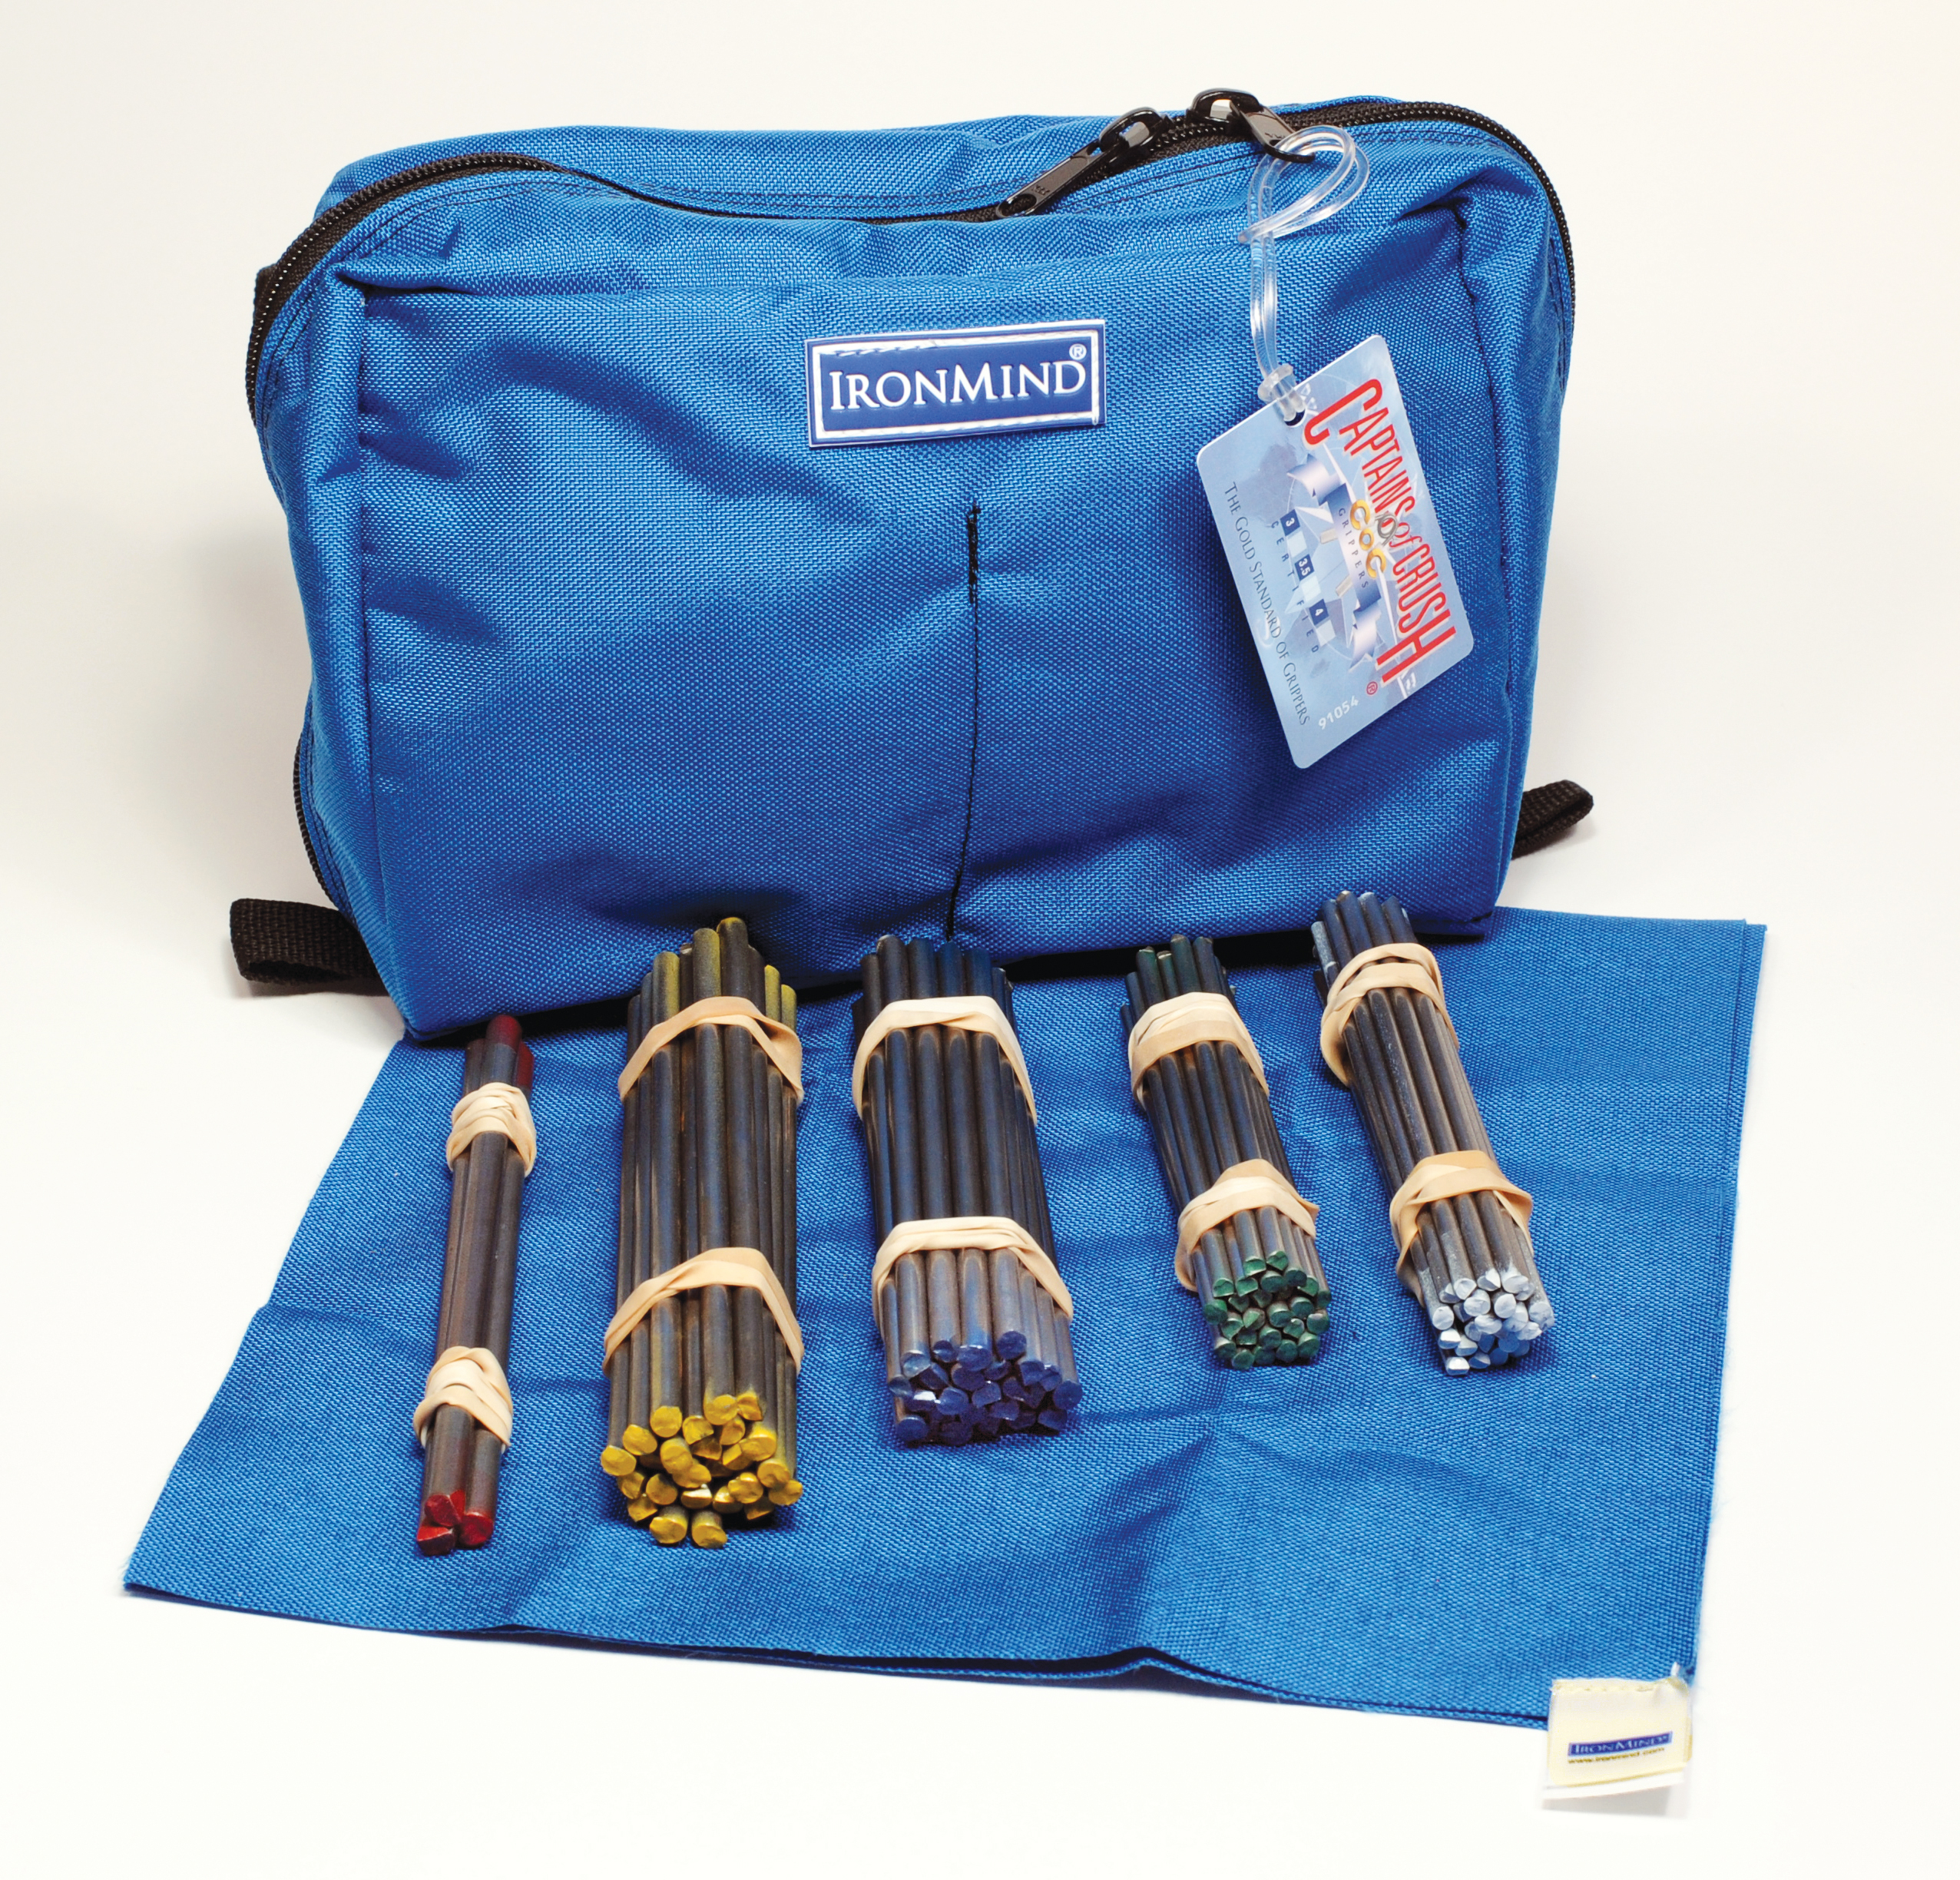 Introduced in 1993, the IronMind Bag of Nails revolutionized steel bending for both recreational and competitive benders. ©IronMind Enterprises, Inc.